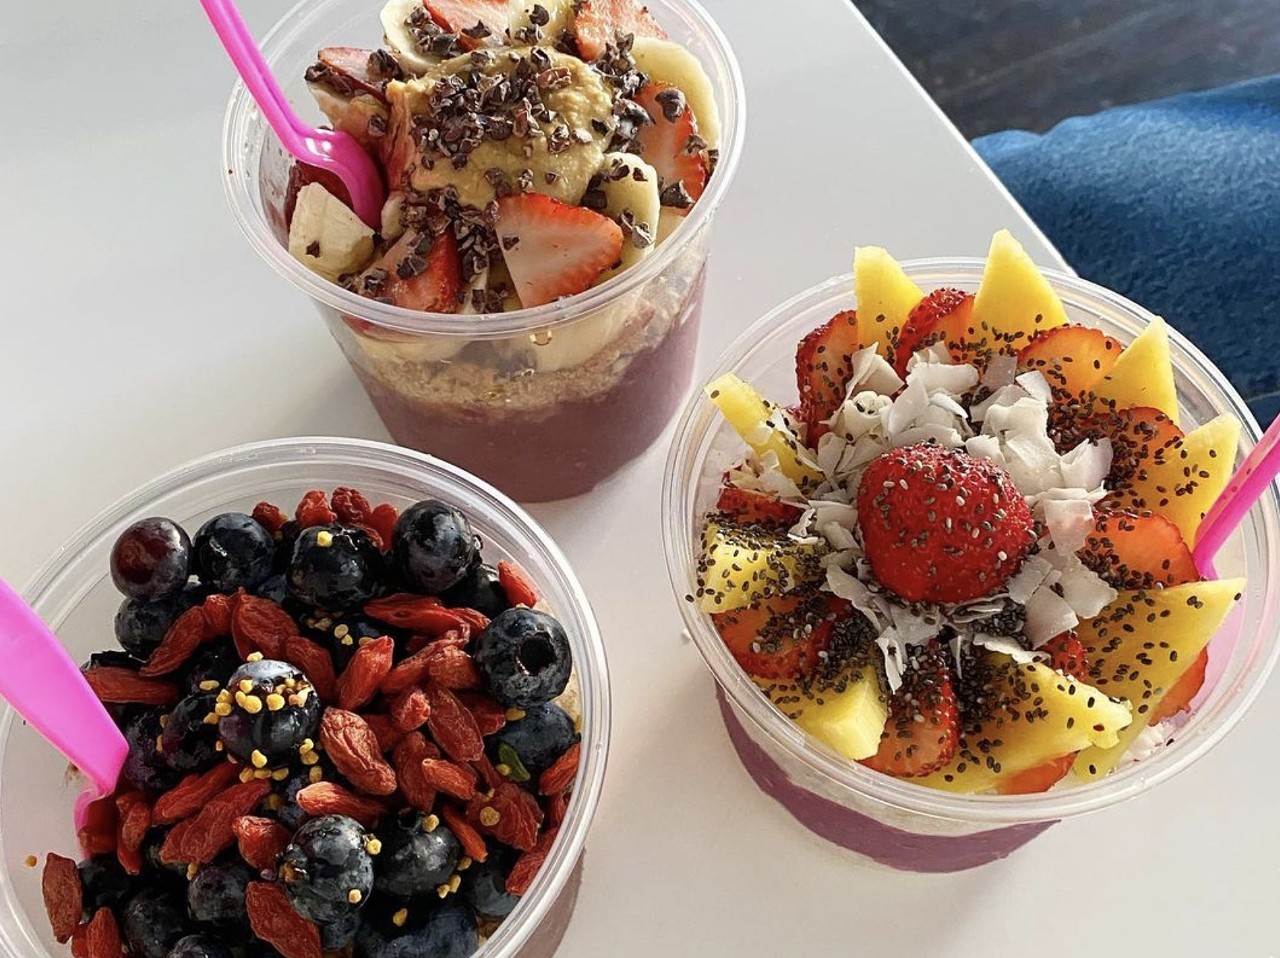 Rise Up
Multiple Locations, (210) 268-8009, riseupsatx.com
Rise Up offers handcrafted açai bowls, pitaya bowls, smoothies and coffee. Their flavorful fruit combinations leave a strong, sweet impression.